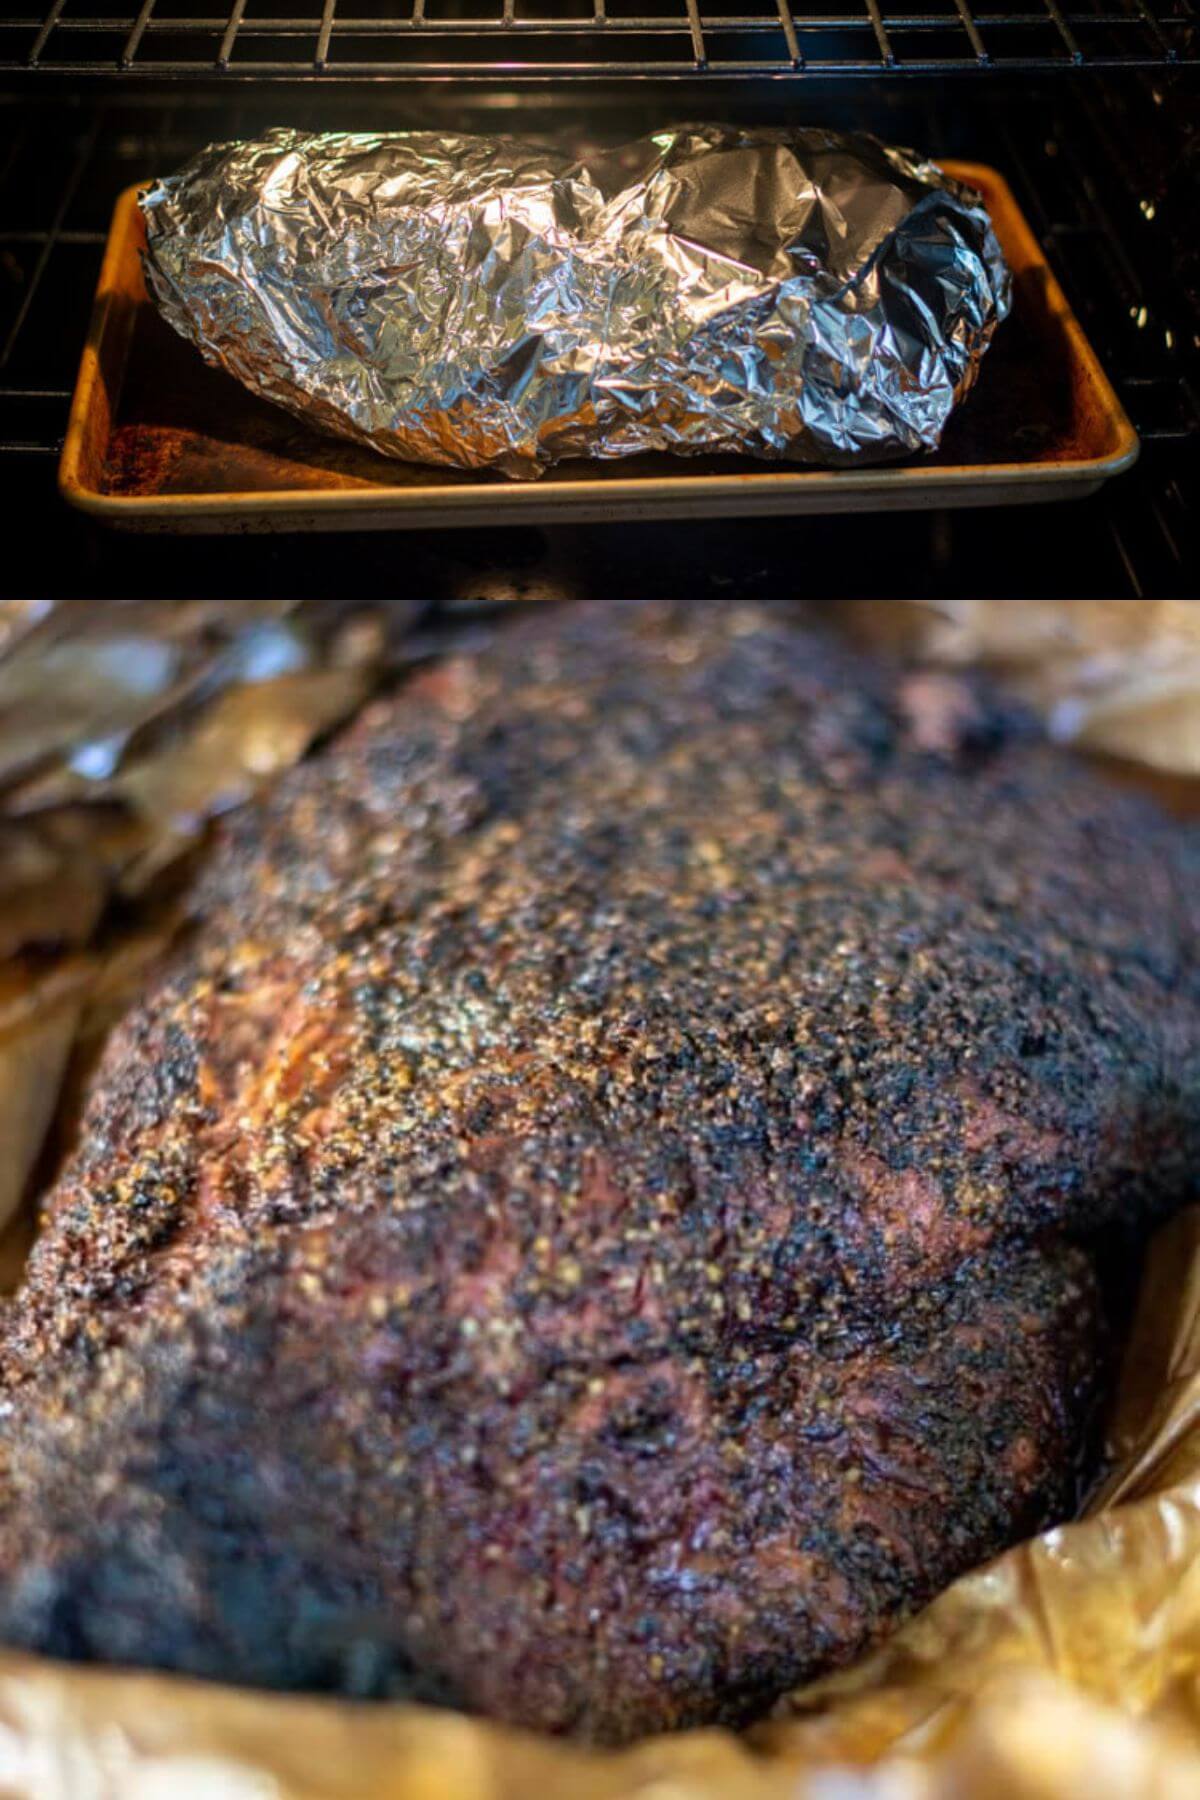 Two images showing wrapped and unwrapped smoked brisket.